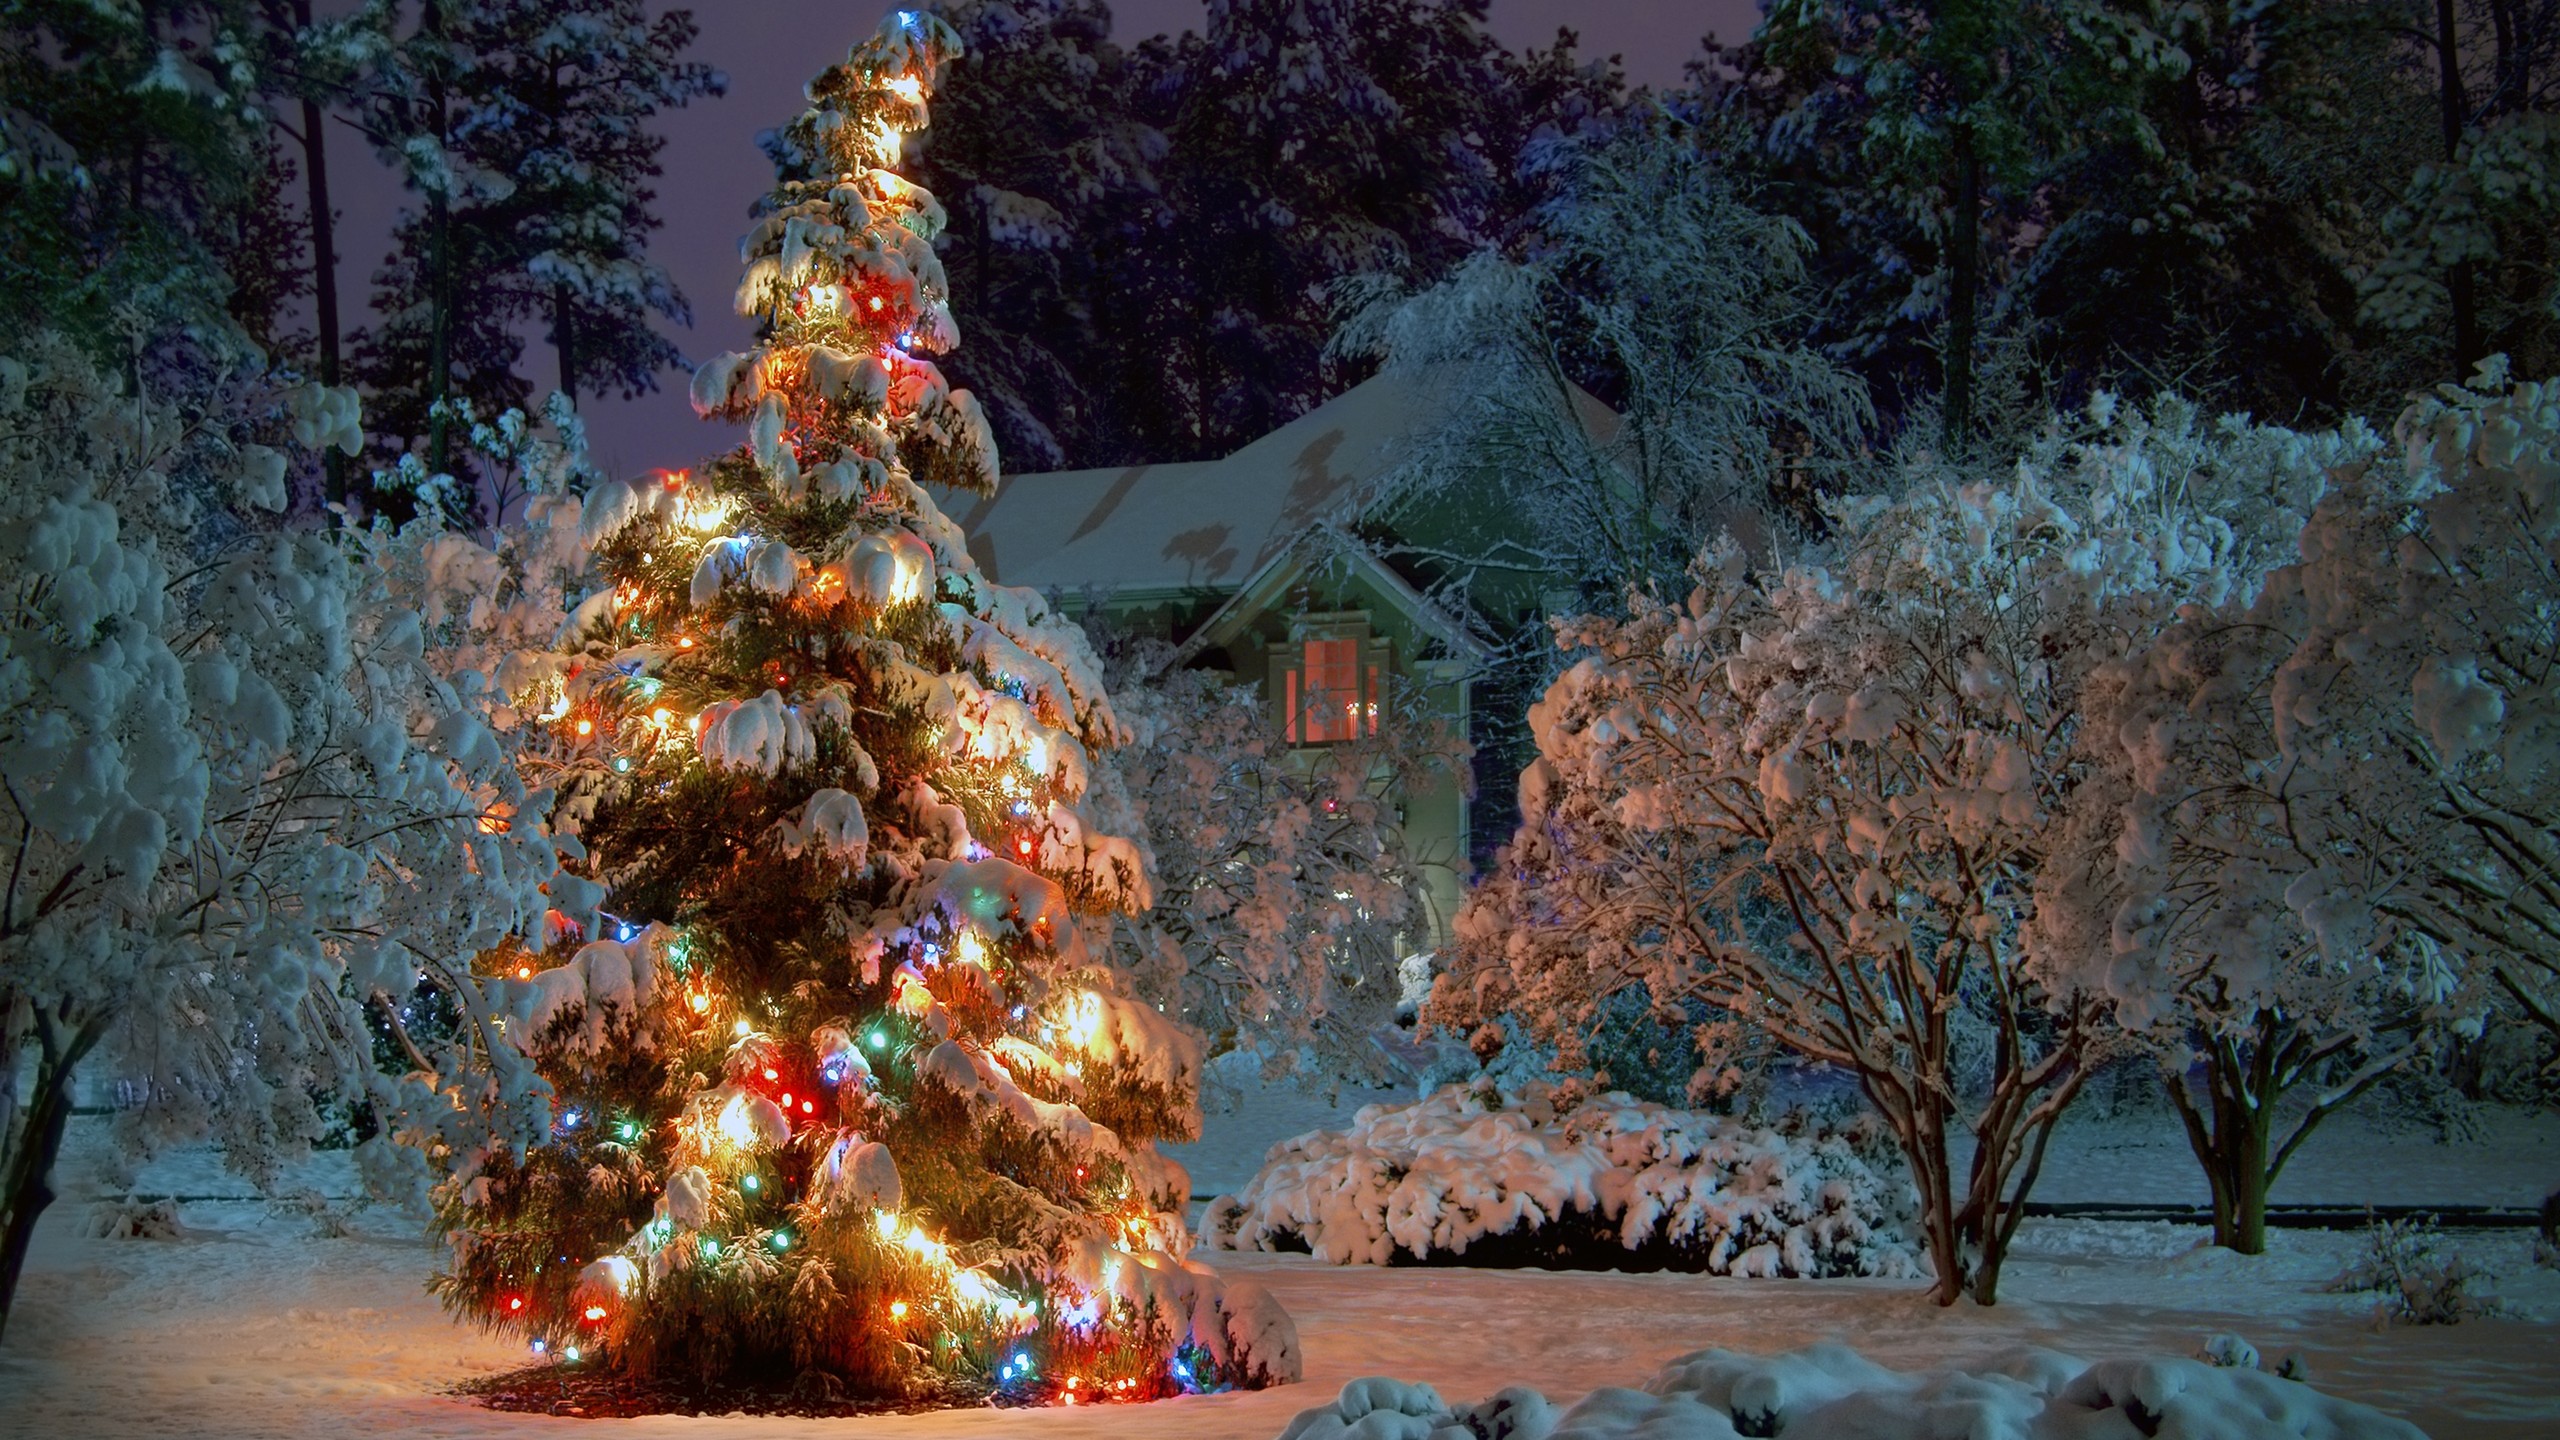 2560x1440 Full Size of Christmas: Christmas Tree Wallpaper Iphone Desktop Free  Backgrounds Backgroundsfree: ...